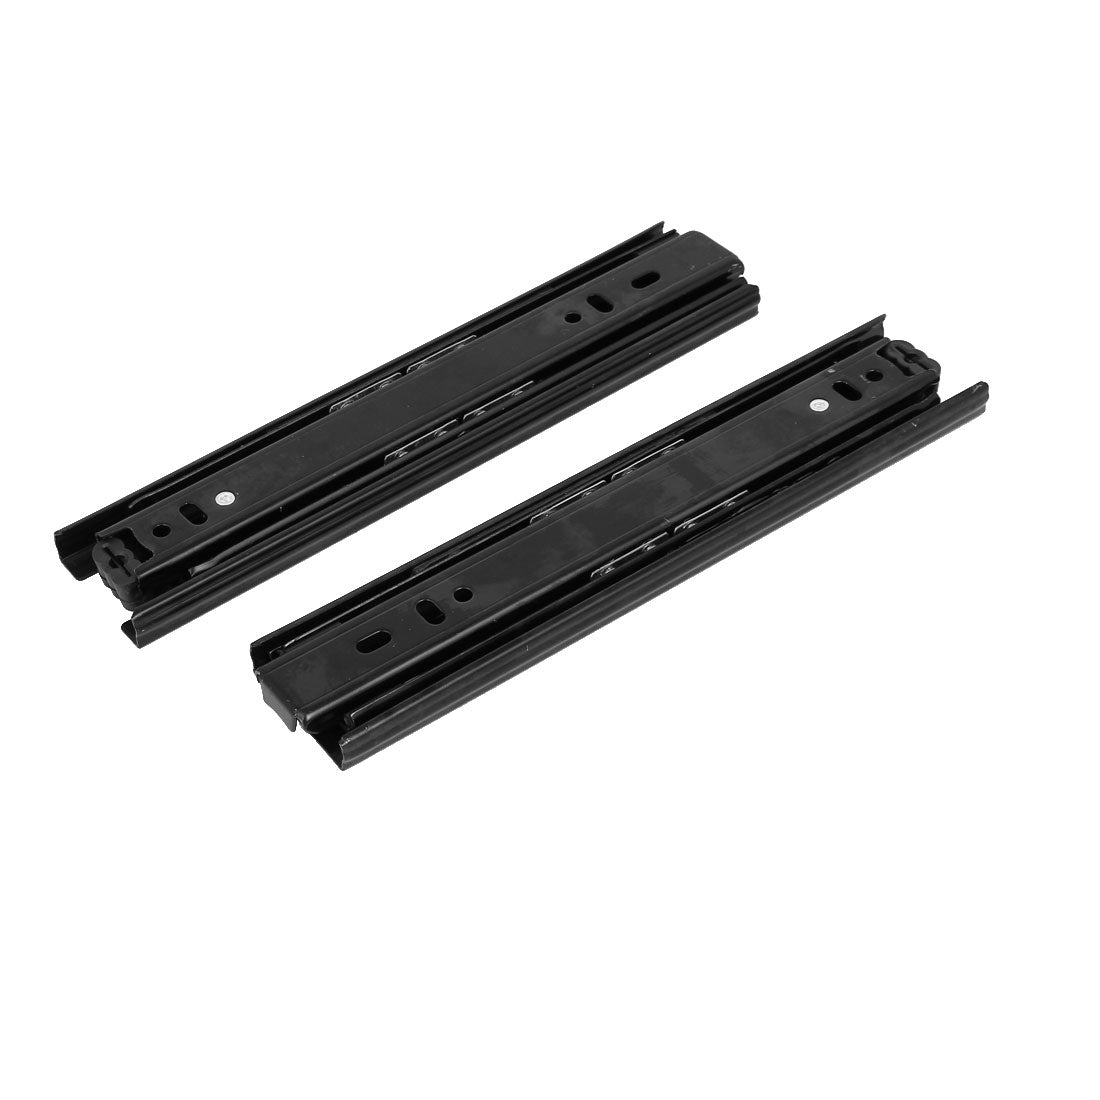 uxcell Uxcell 8-inch 3 Fold Side Mount Full Extension Ball Bearing Drawer Slides Black 2pcs